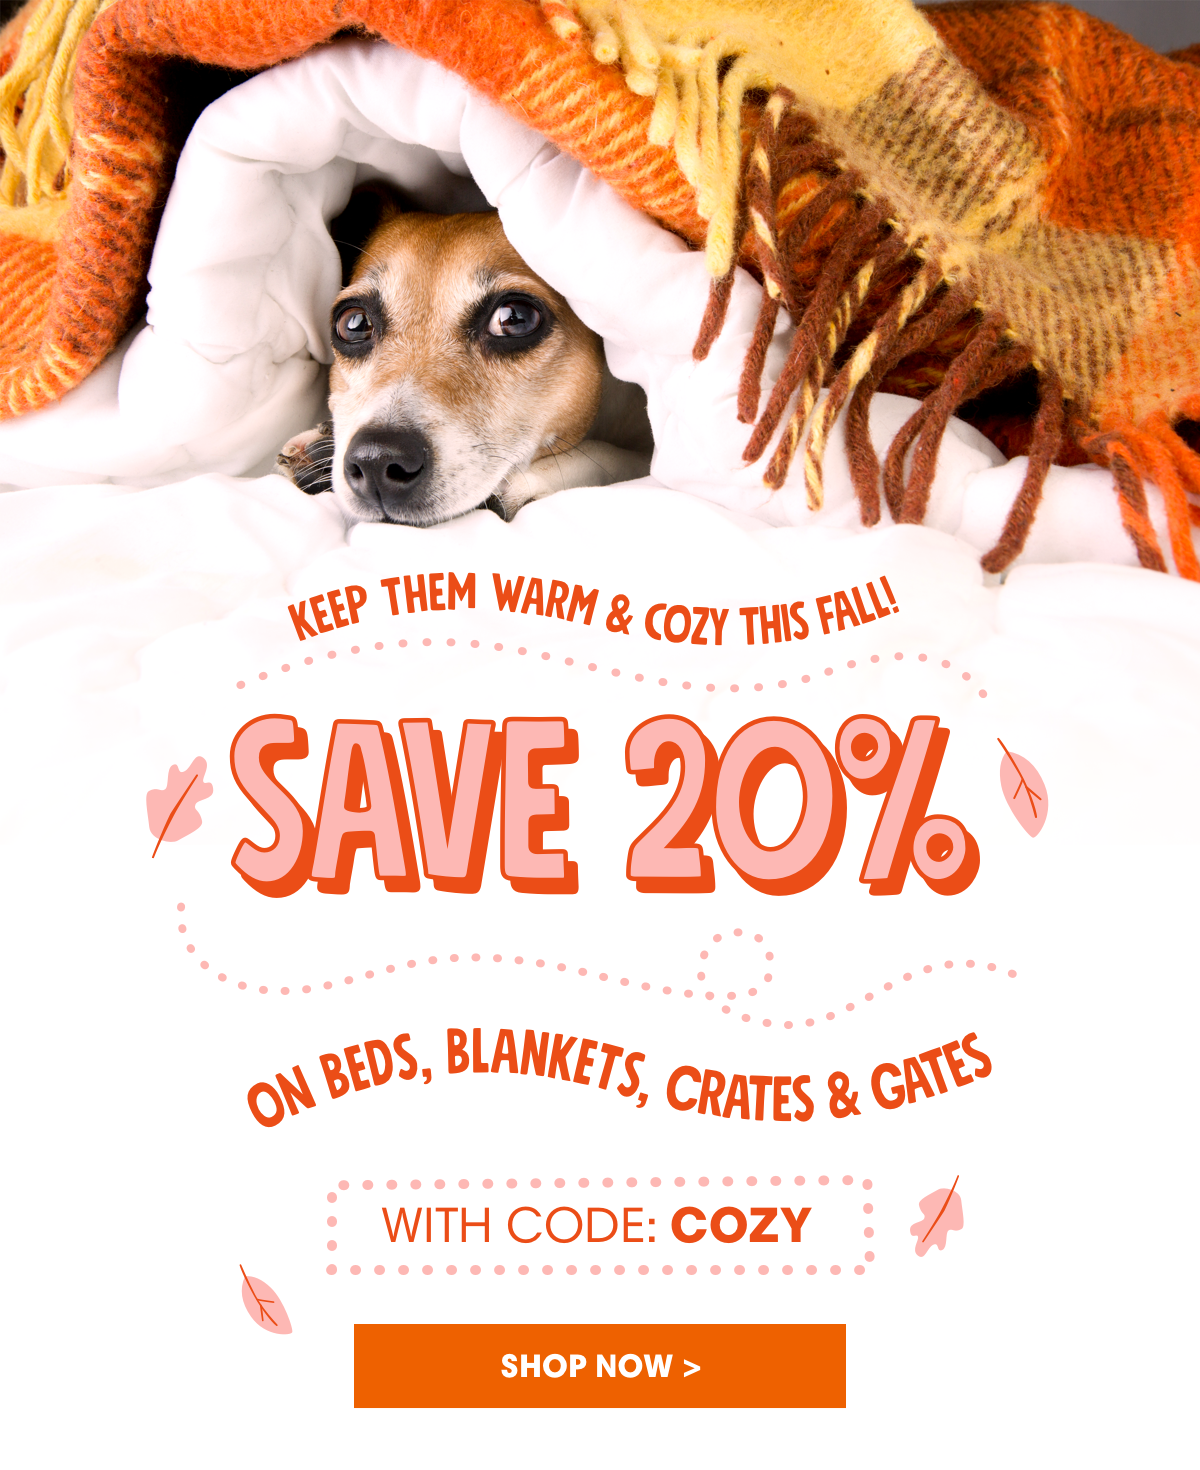 Save 20% on Beds, Carriers, Crates & Gates!